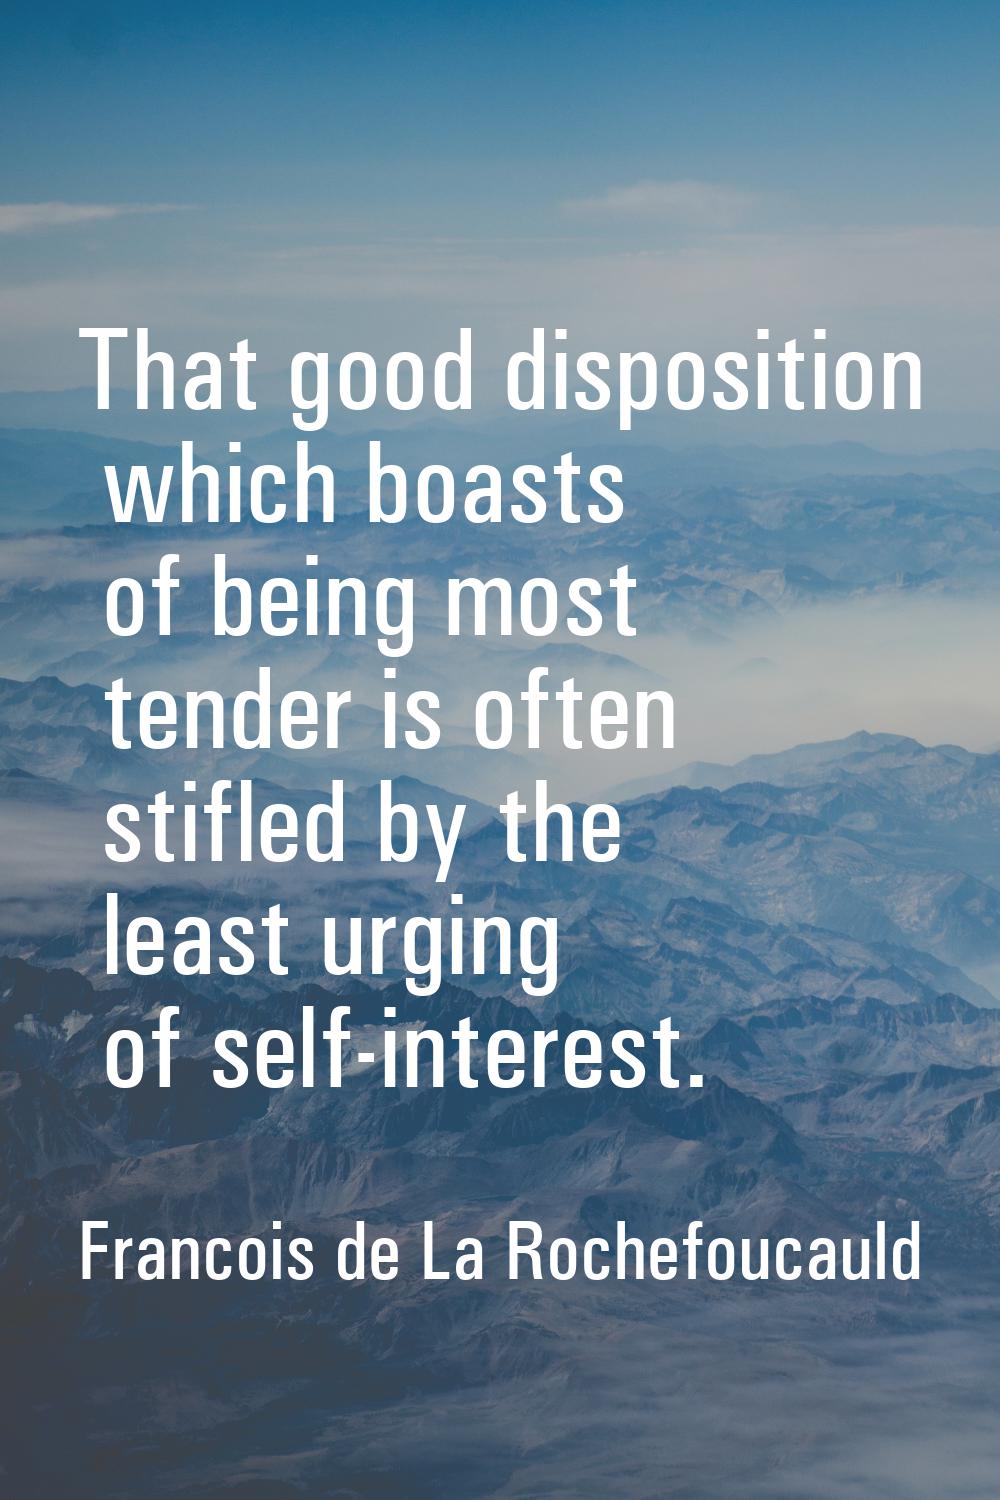 That good disposition which boasts of being most tender is often stifled by the least urging of sel